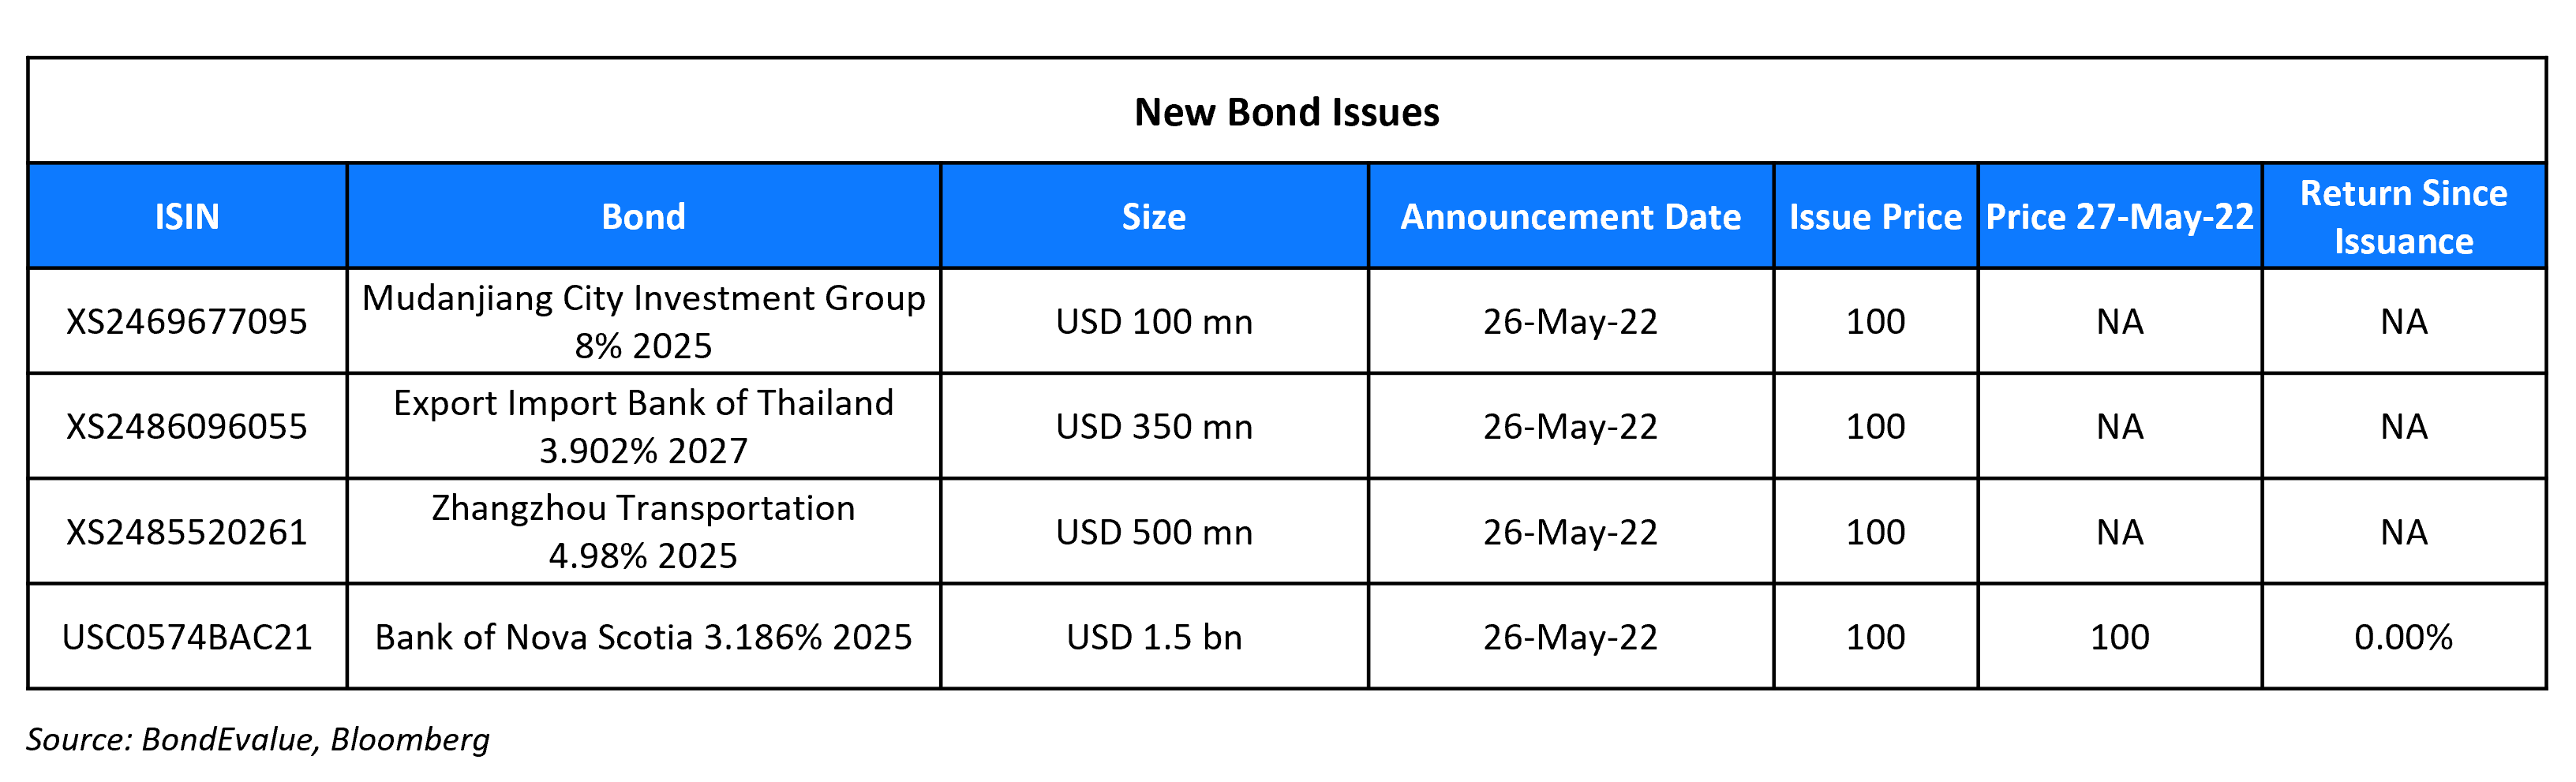 New Bond Issues 27 May 22